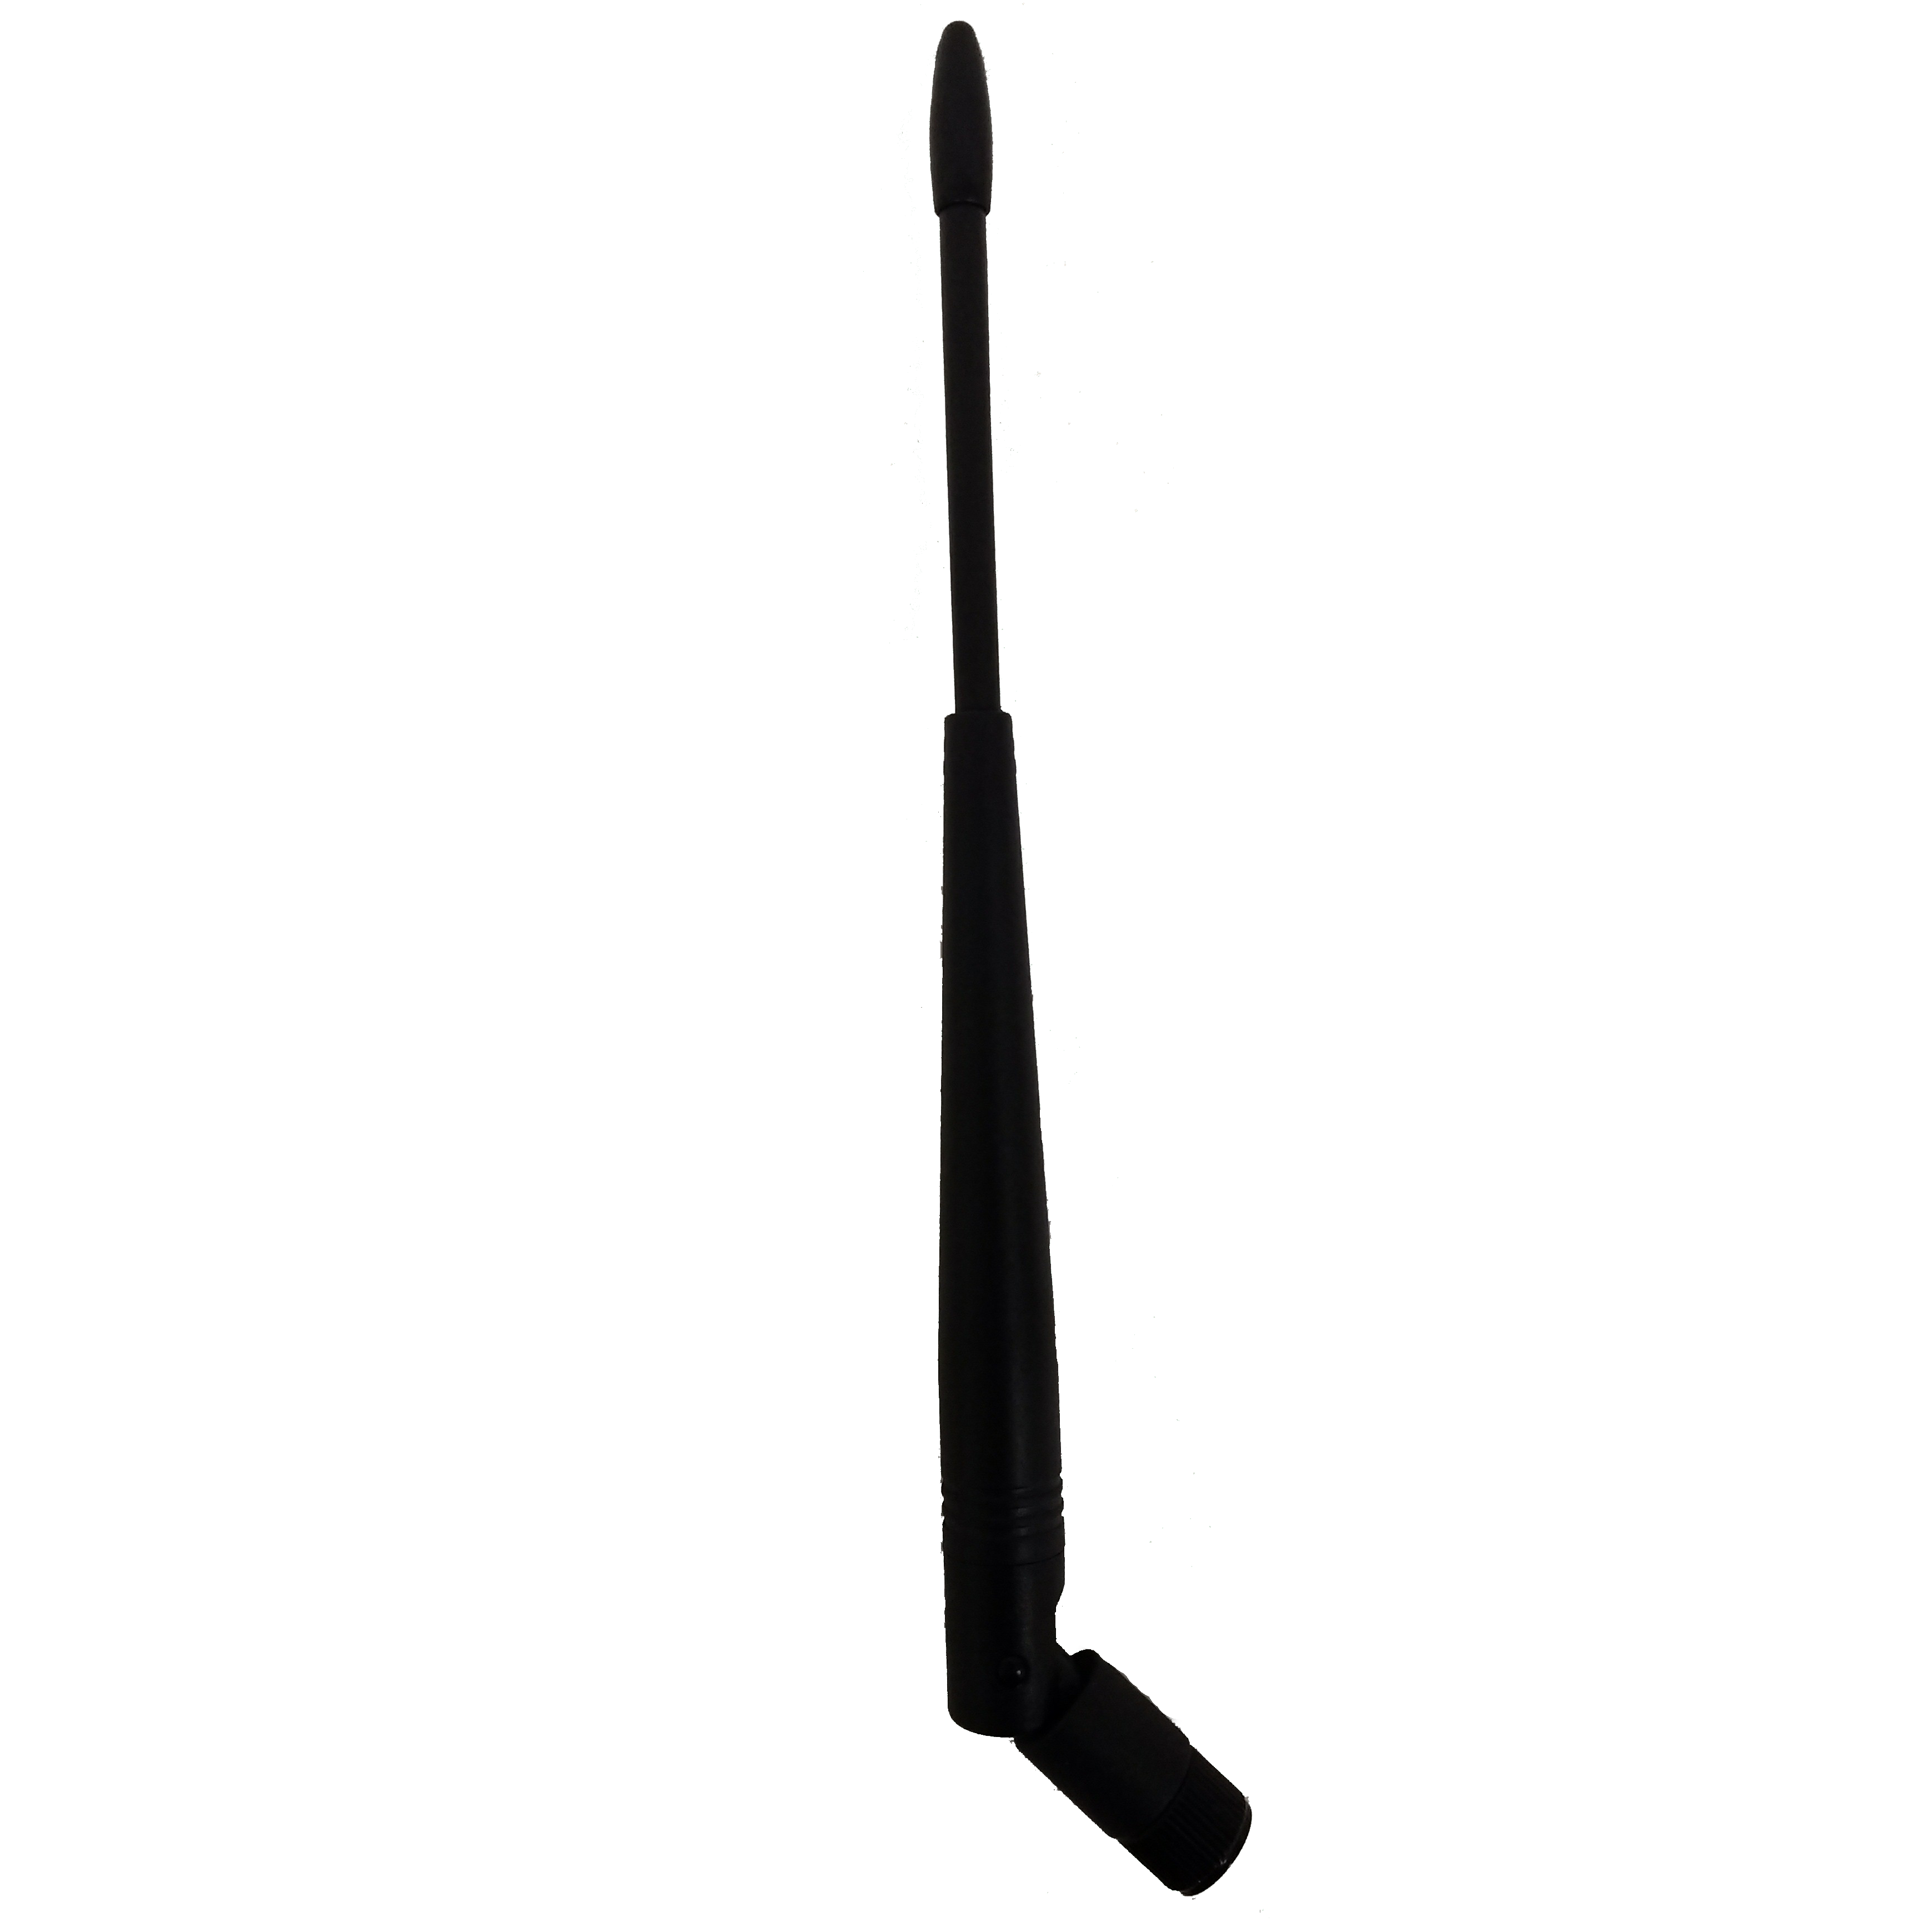 (A-0014) Fair-Play Gen 2,3 Wireless Antenna - Articulating (FREE SHIPPING USE COUPON CODE SHIPFREE)